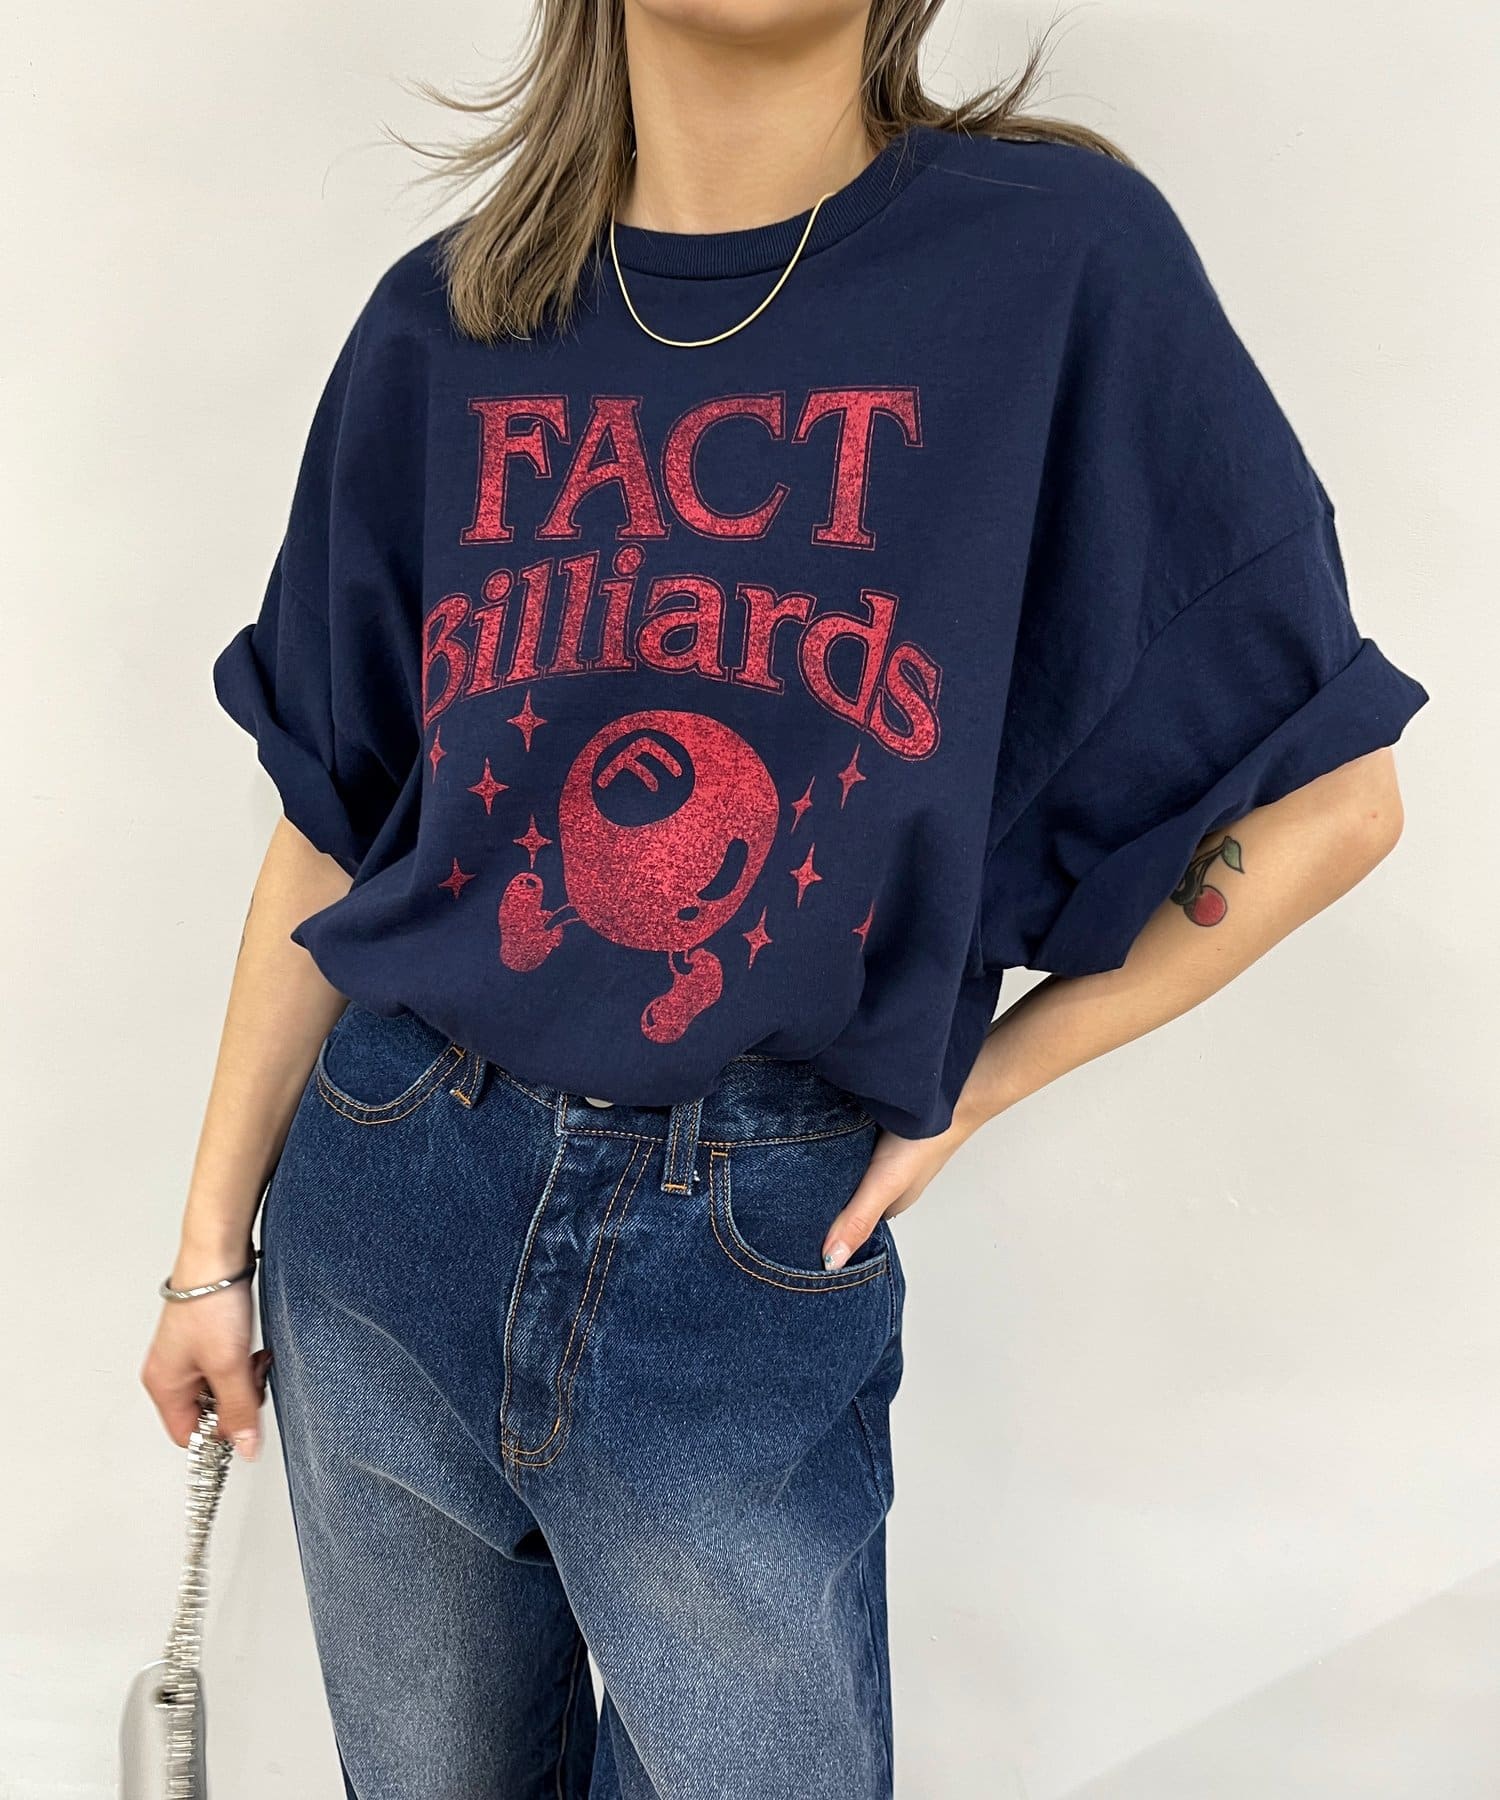 COOPER FACTビリヤードカレッジロゴビッグTEE | WHO'S WHO gallery